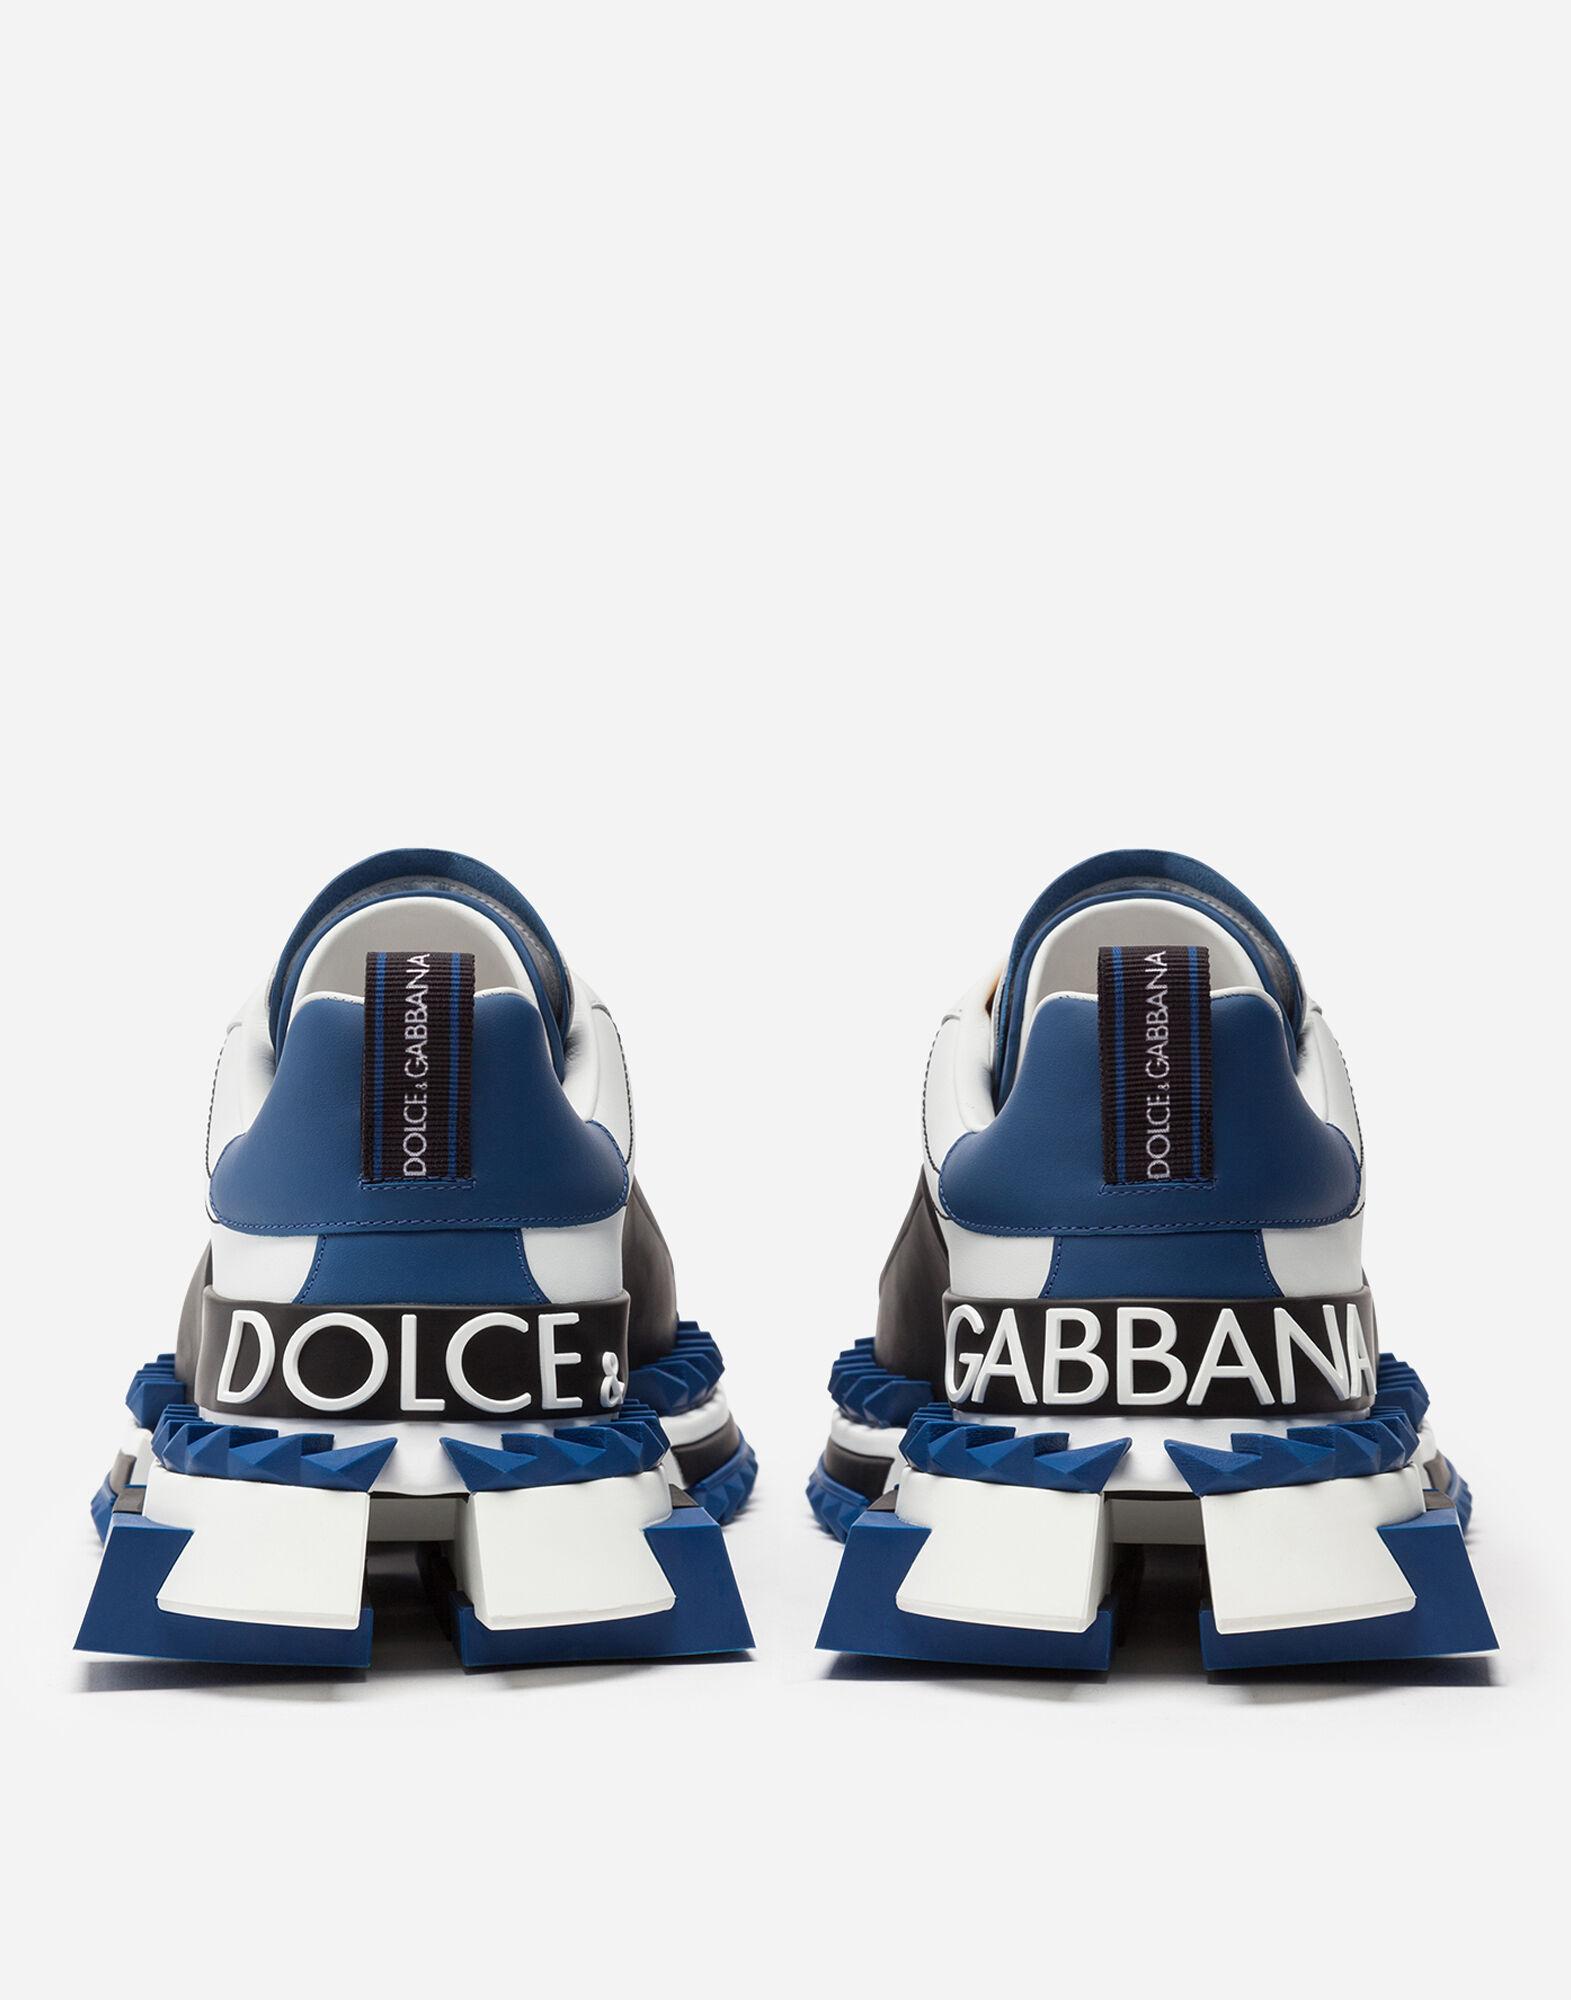 Dolce & Gabbana Leather Multi-colored Super King Sneakers in White/Blue ...